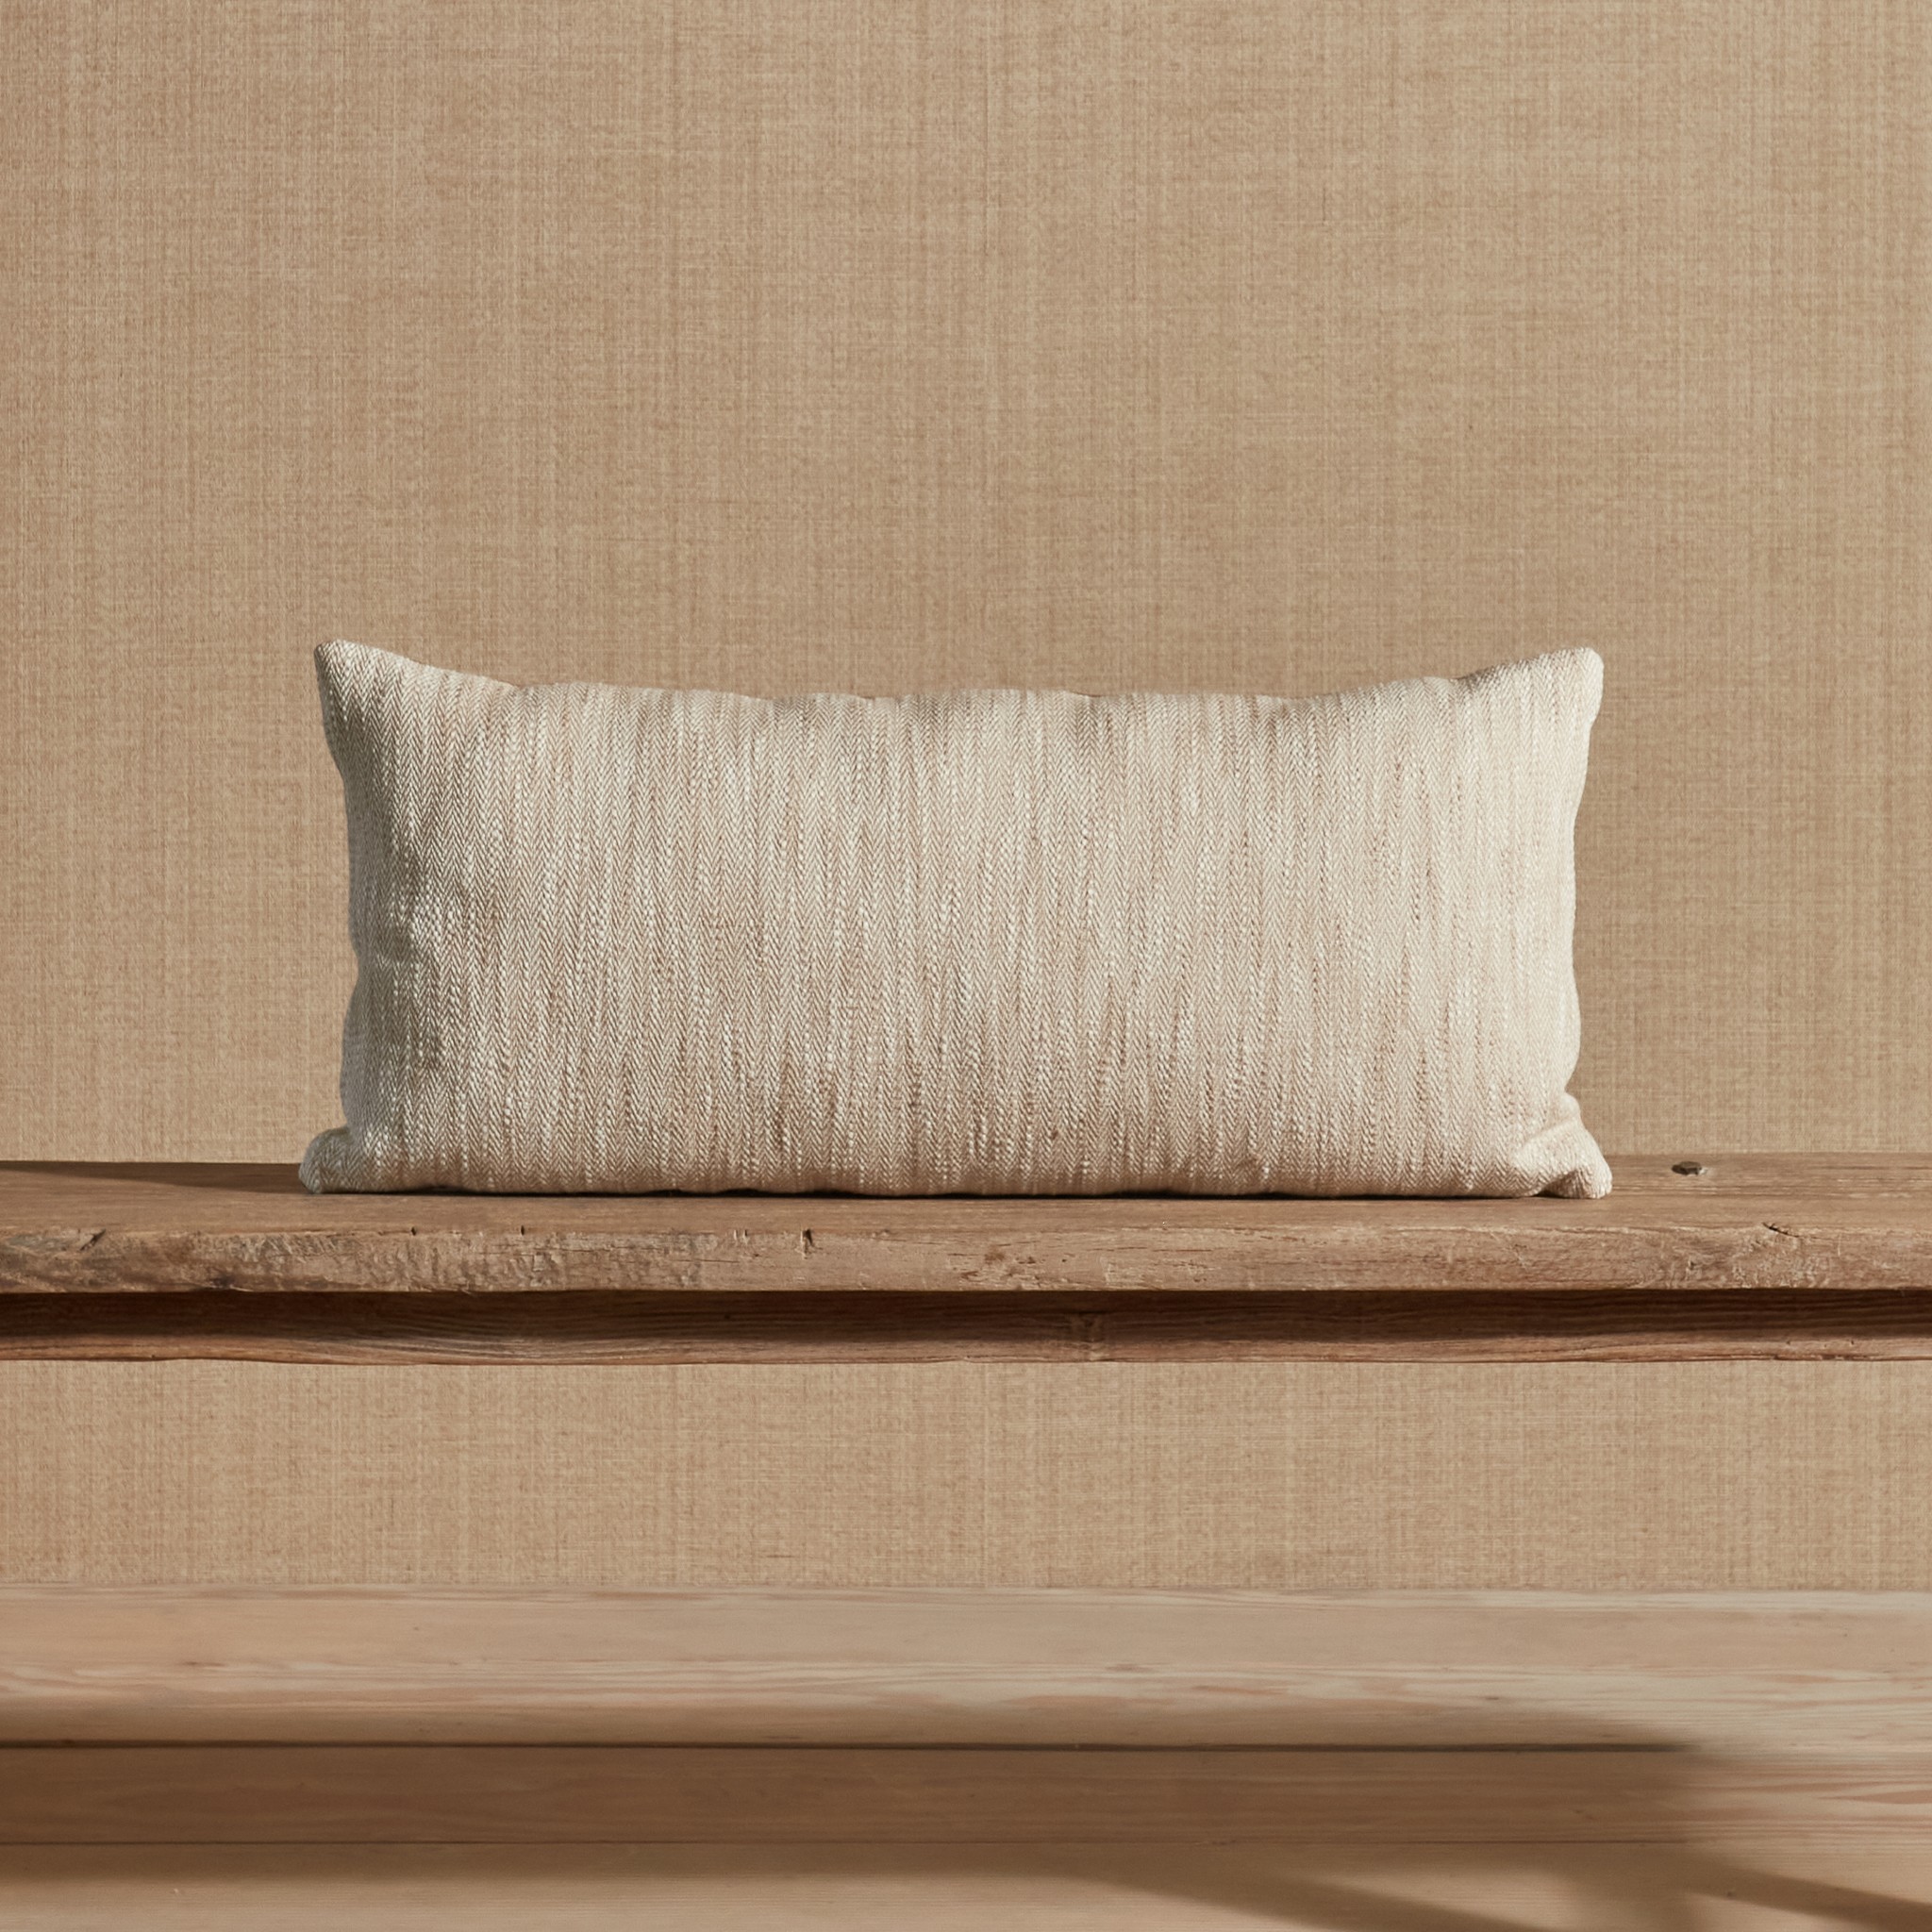 a white pillow sitting on top of a wooden bench